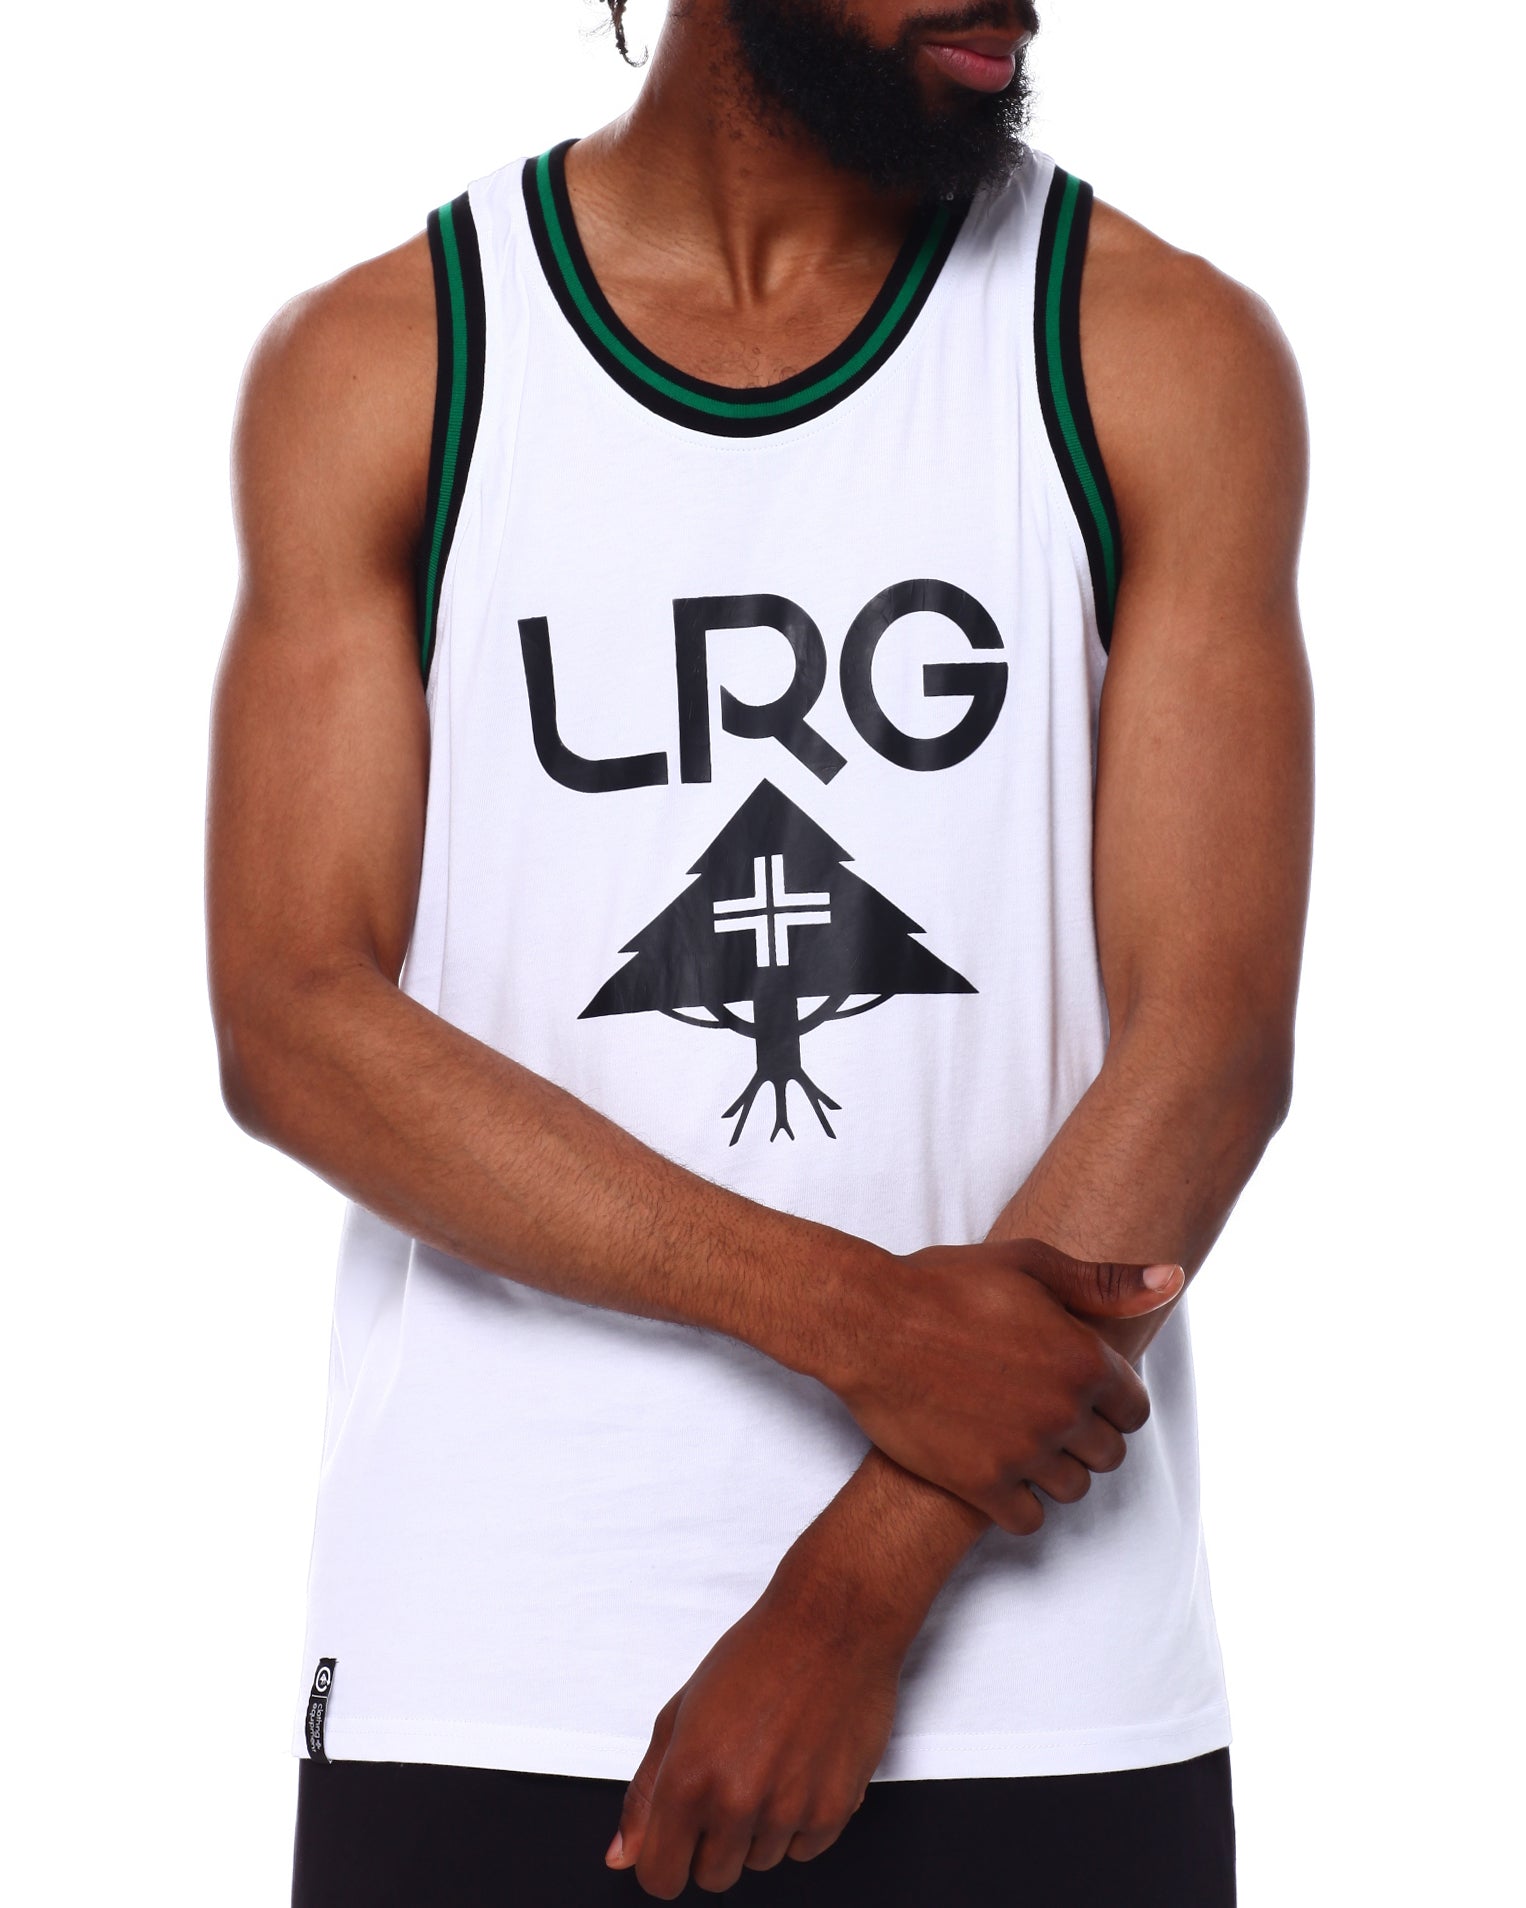 Men's LRG Future Logo Tank Top – Rex Distributor, Inc. Licensed Products and T-shirts, Sporting goods,